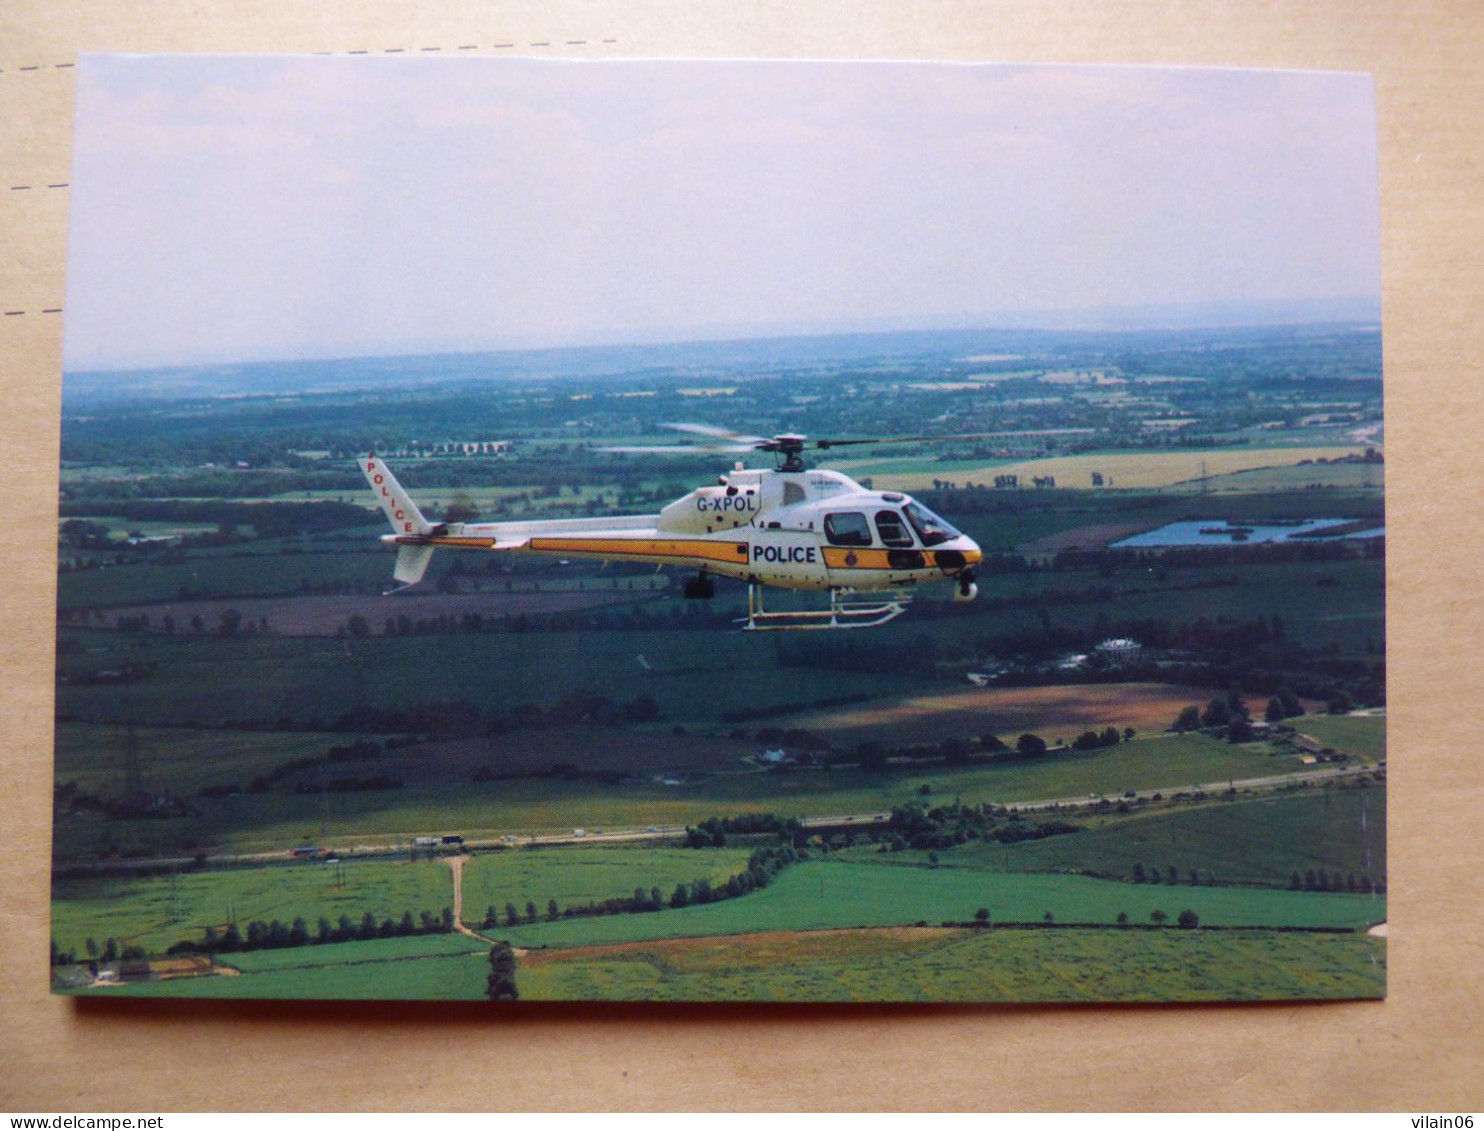 ECUREUIL  POLICE ESSEX - Helicopters